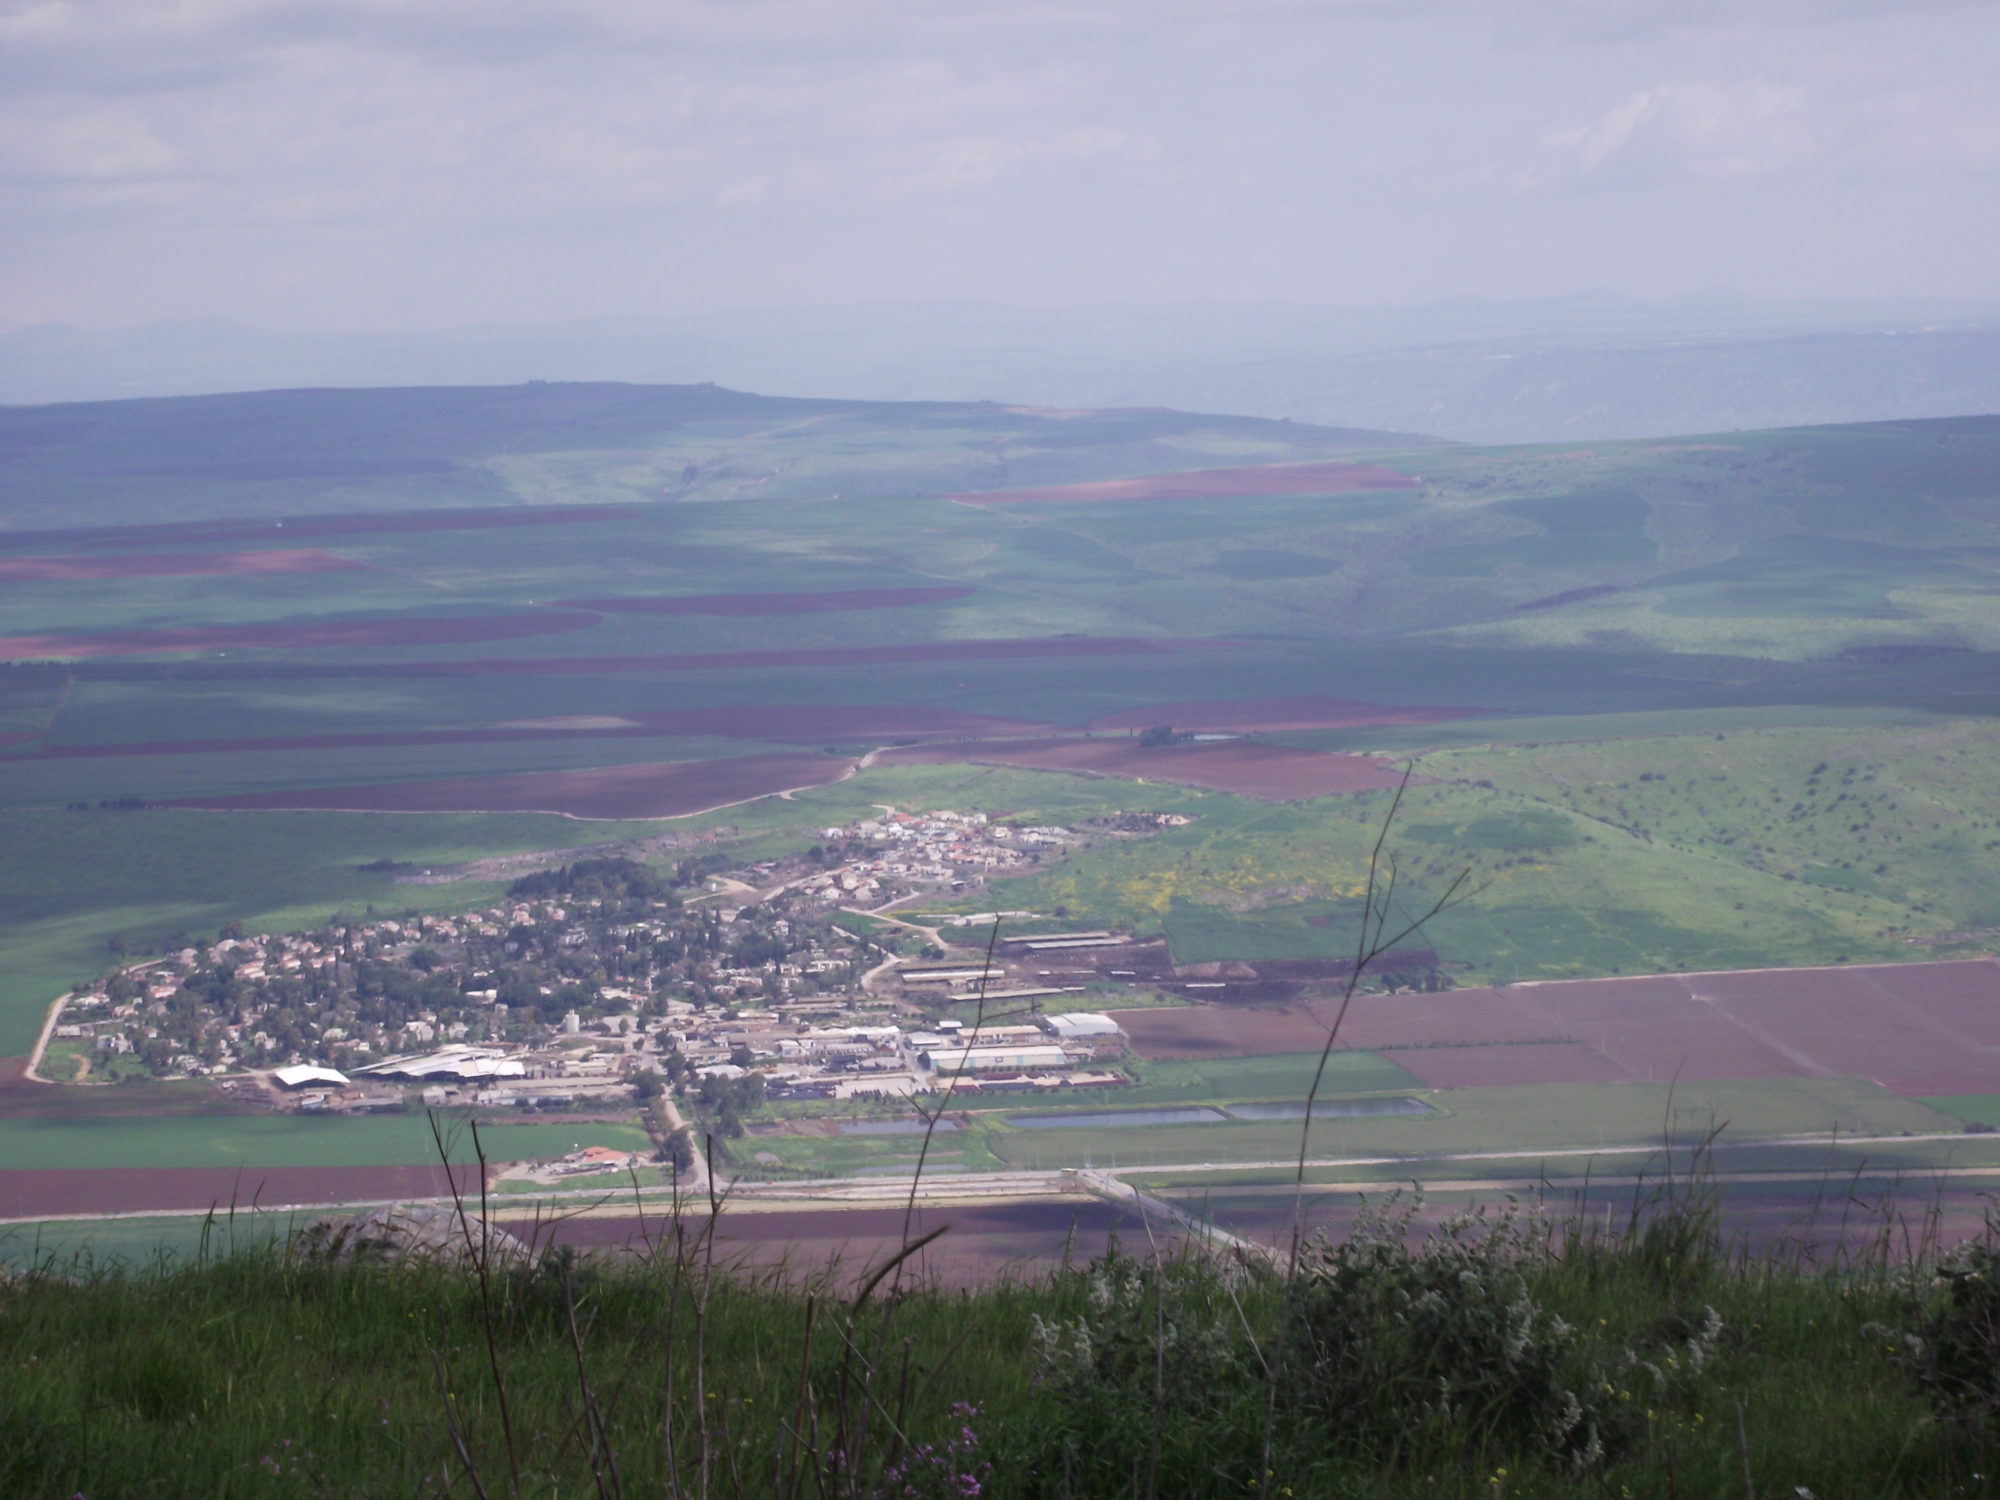 The Jezreel Valley from Mt. Gilboa